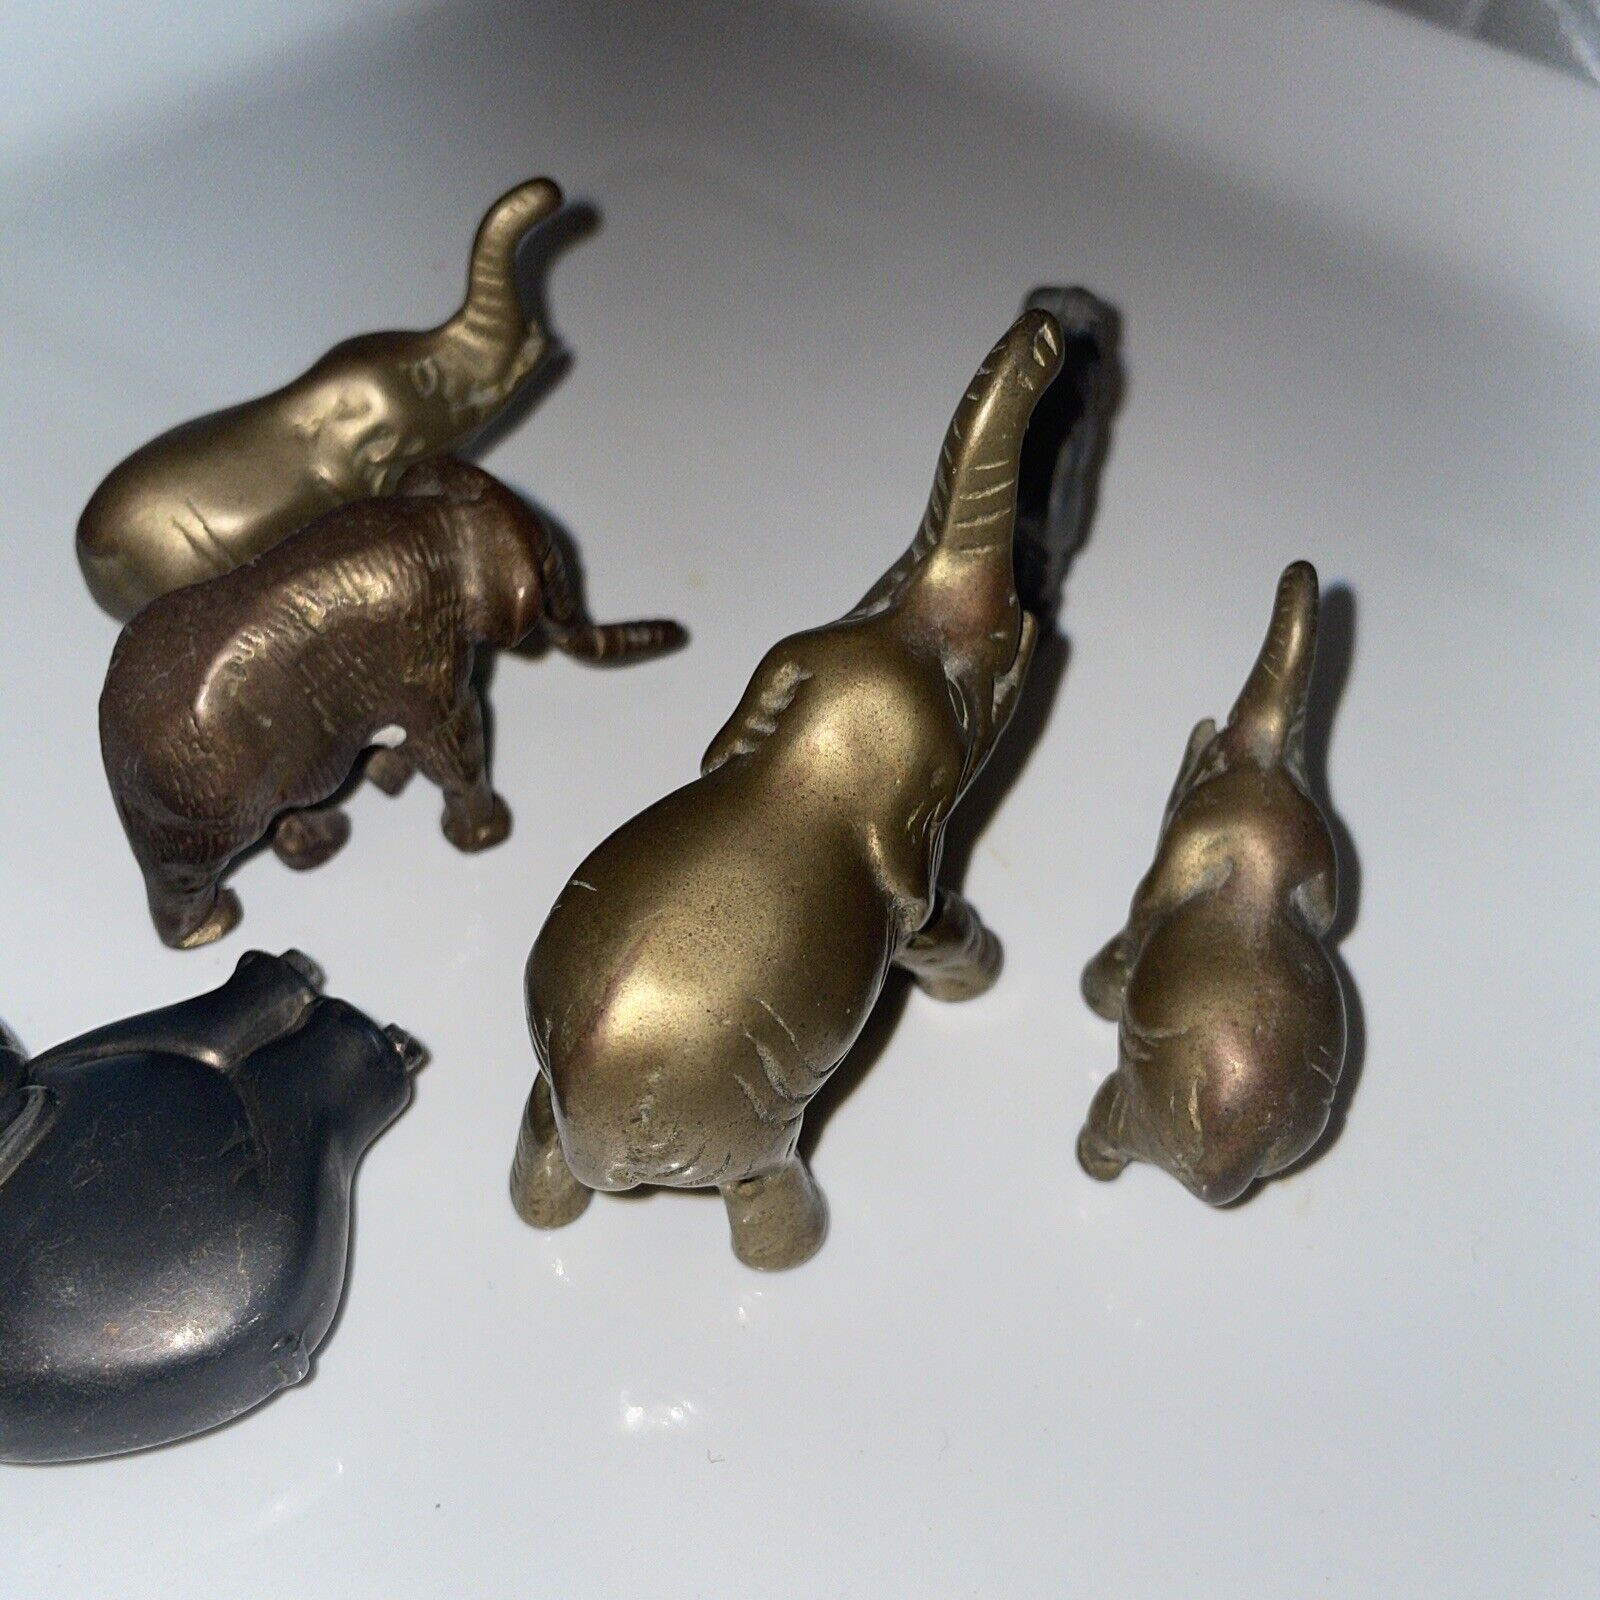 Vtg Lot Of 6 Small Brass Elephant Figurines Trunks Up Standing Poses